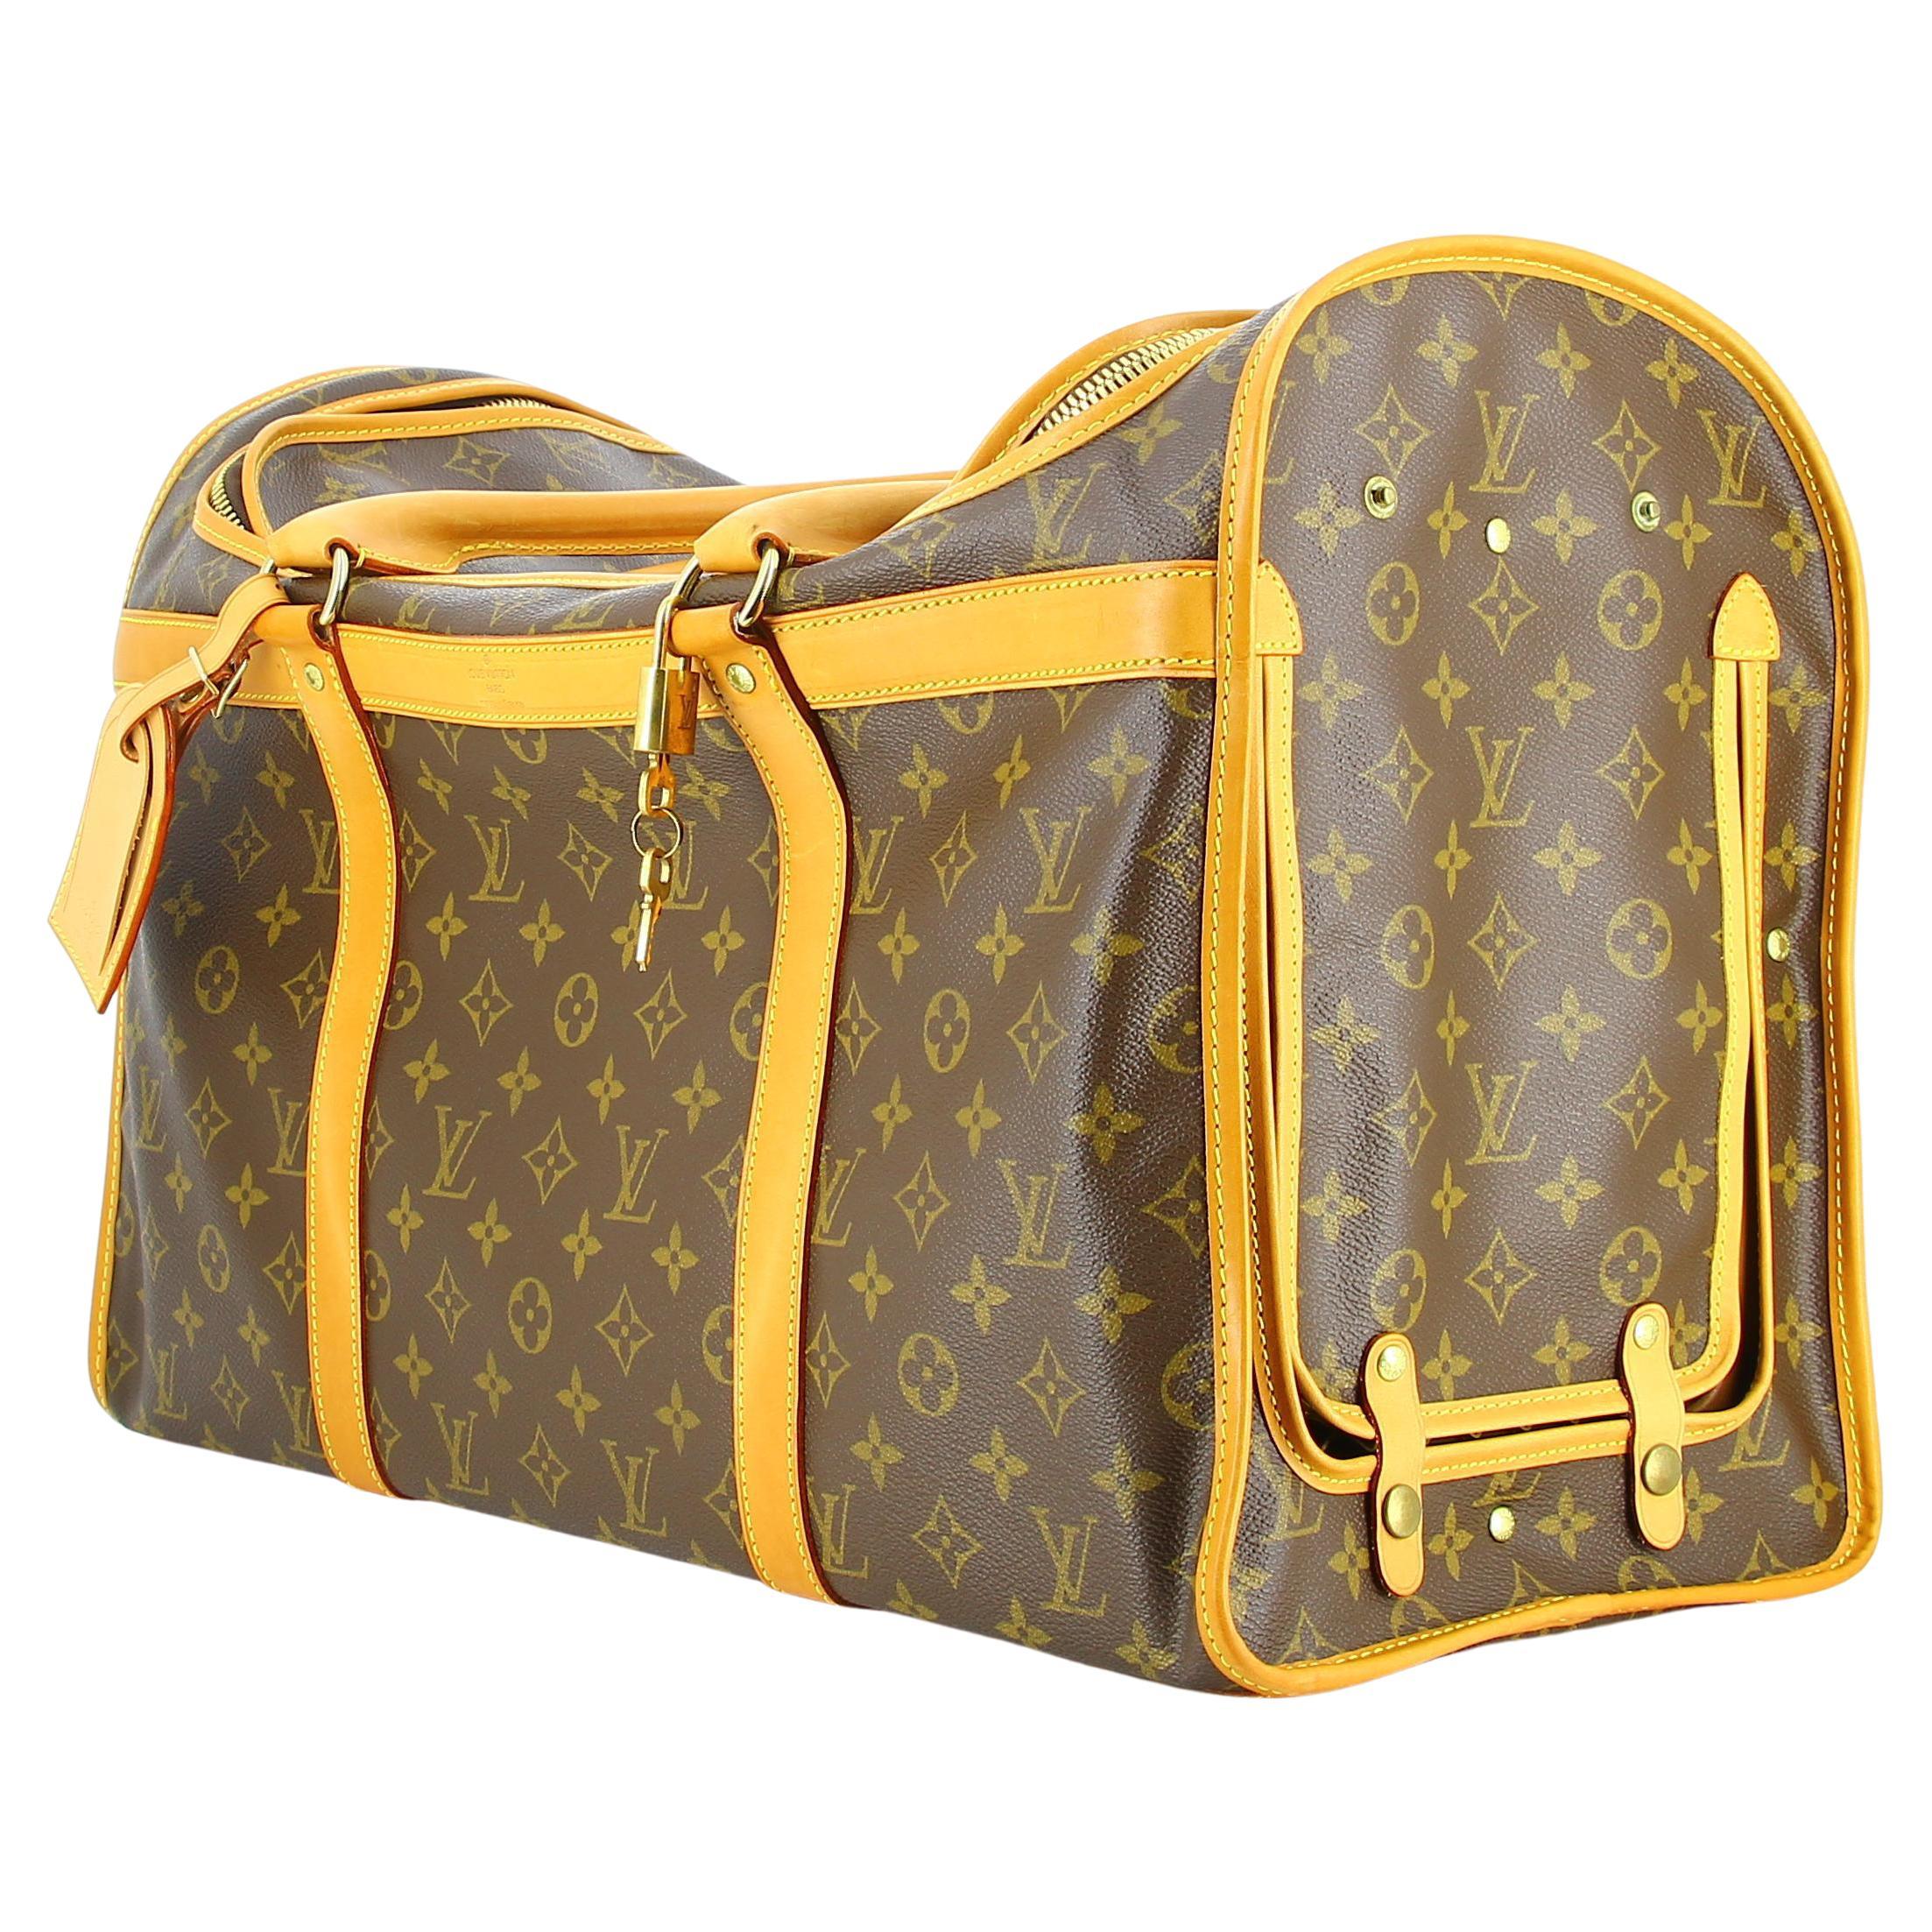 Louis Vuitton Pet Carrier - 10 For Sale on 1stDibs  louis vuitton dog  carrier for sale, lv dog bag price, louis vuitton dog carrier 40 price